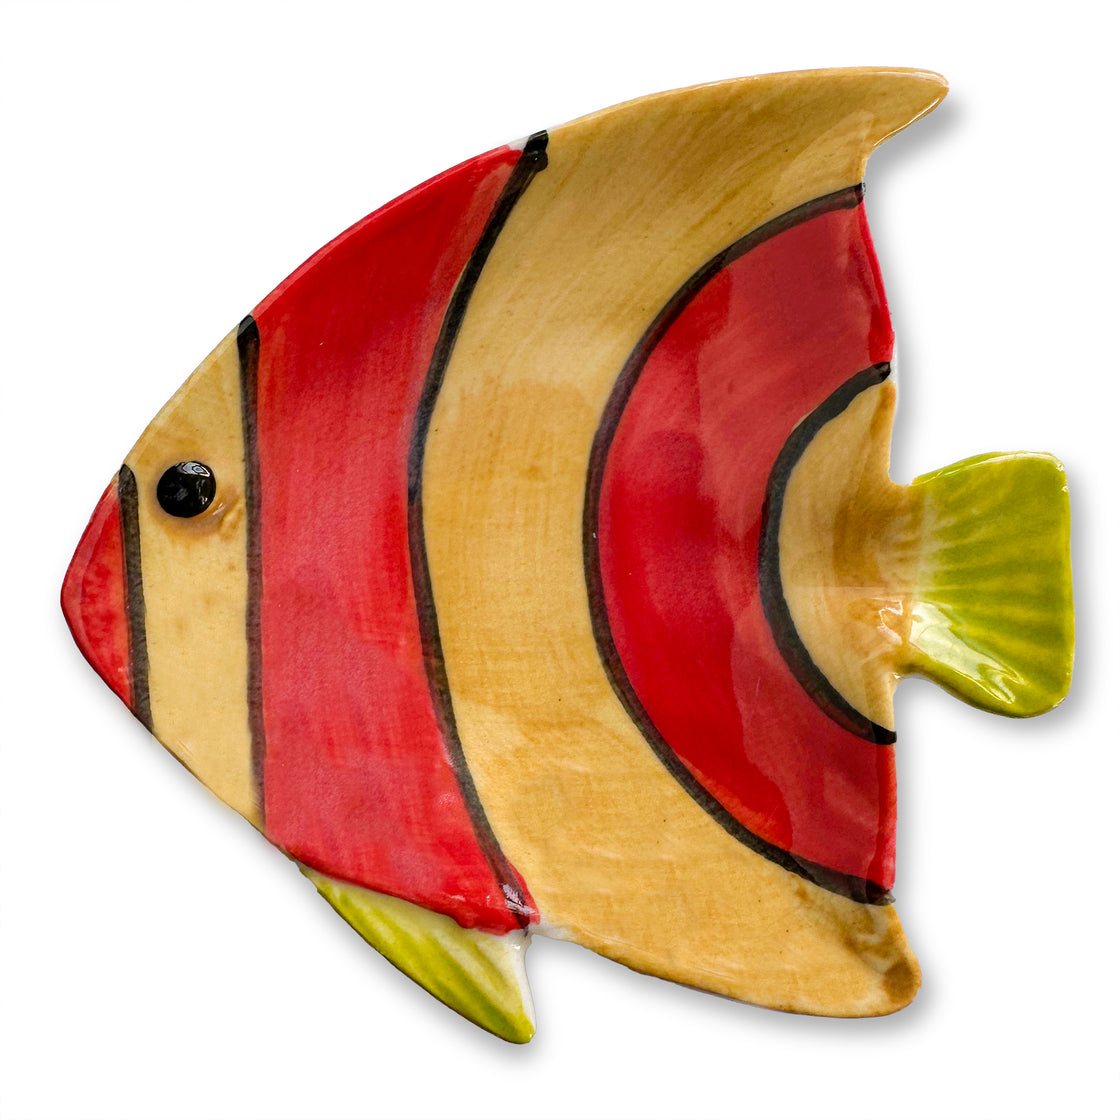 Vibrant Mini Fish Plates in yellow, red and black stripes, with cute eye by rengora